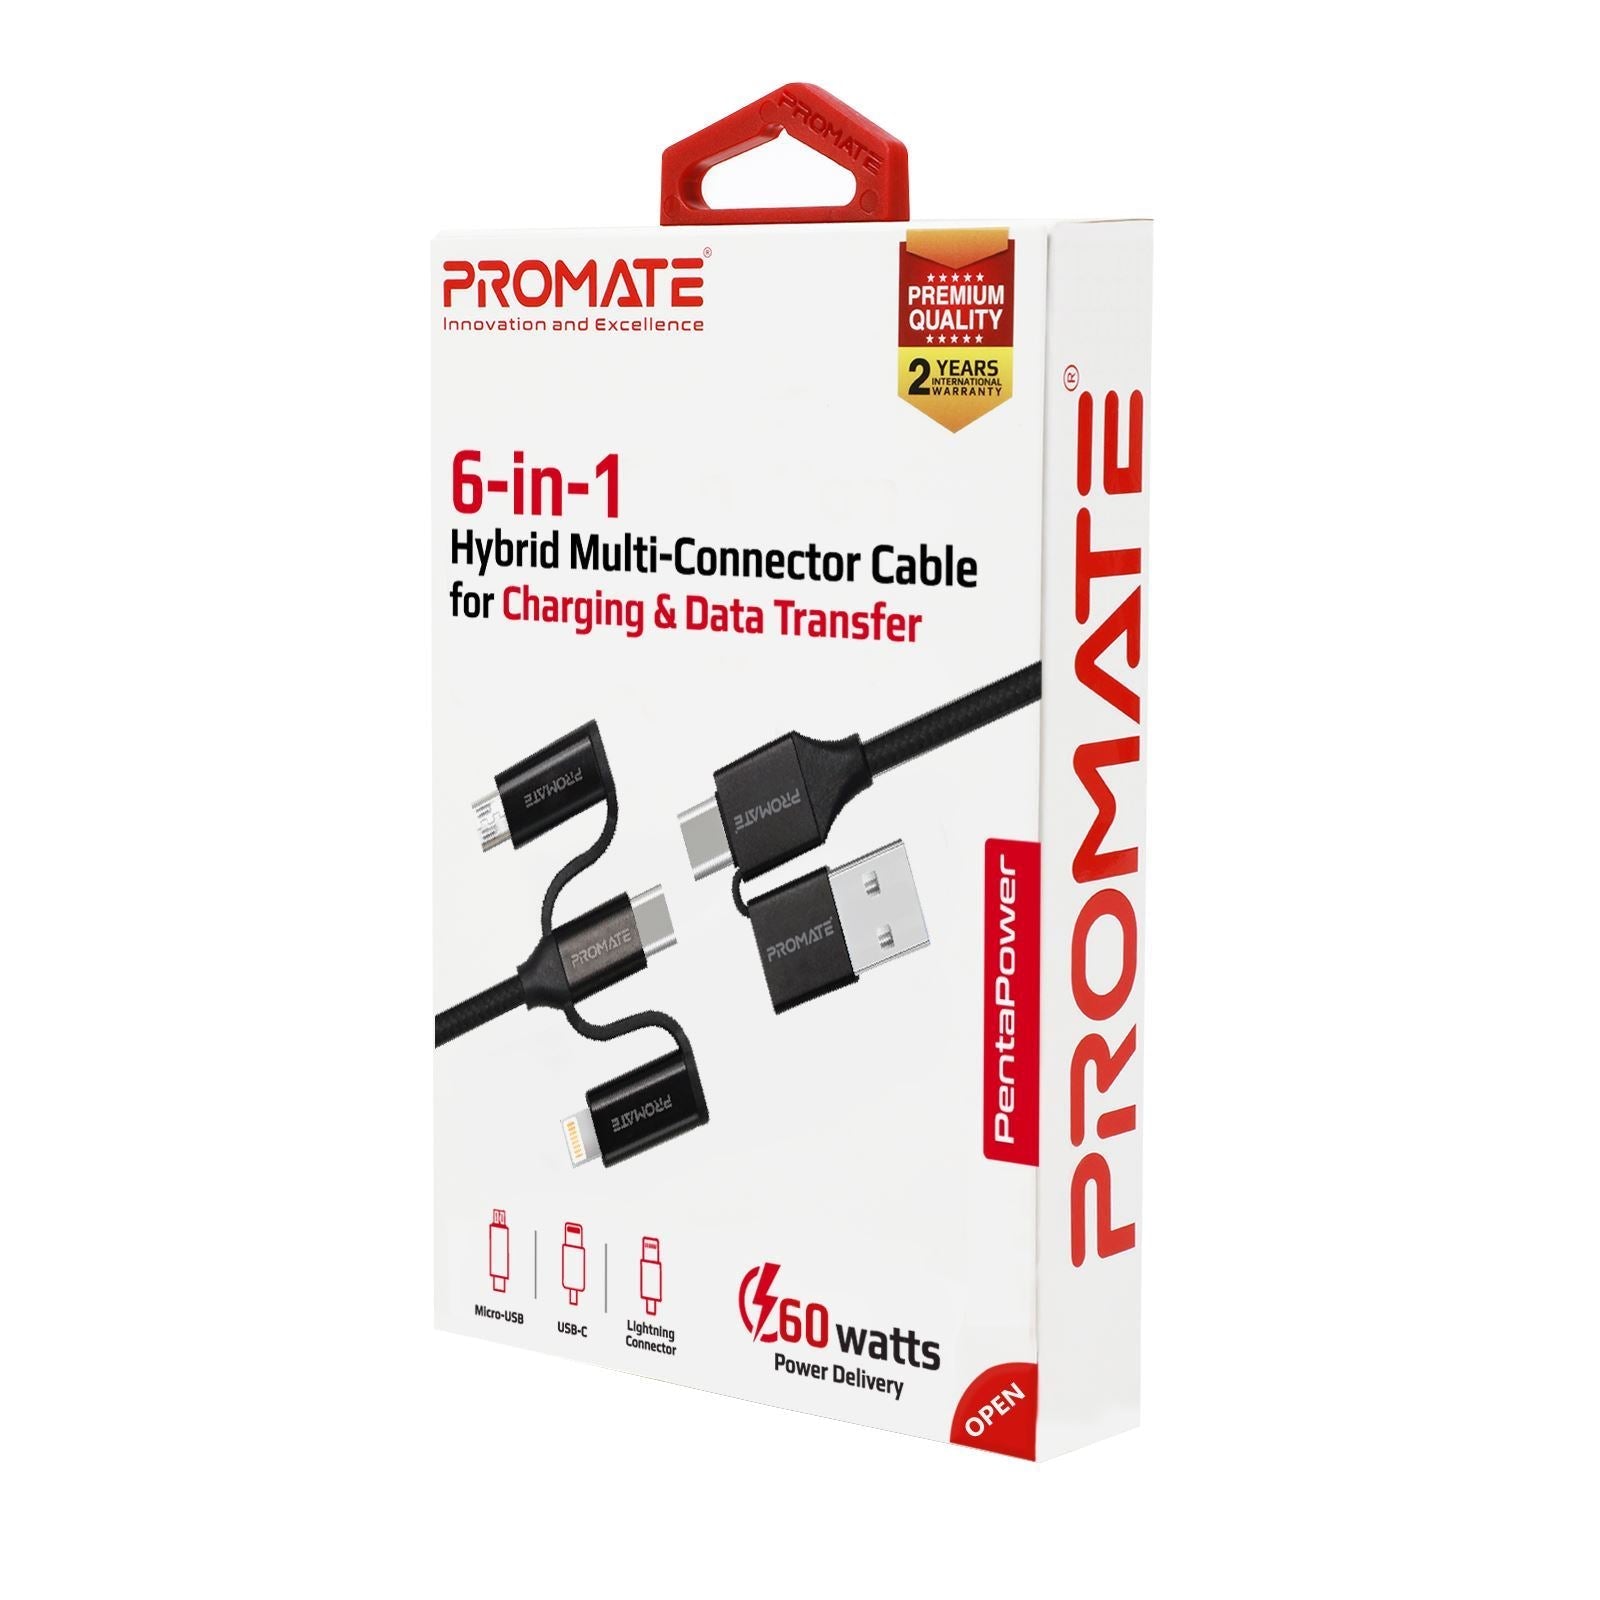 PROMATE_6-in-1_Hybrid_1.2m_Multi-Connector_Cable_for_Charging_&_Data_Transfer._60W_Power_Delivery_USB-C_to_USB-C._Micro-USB,_USB-C,_Lightning_Connector._Black_Colour. 1560